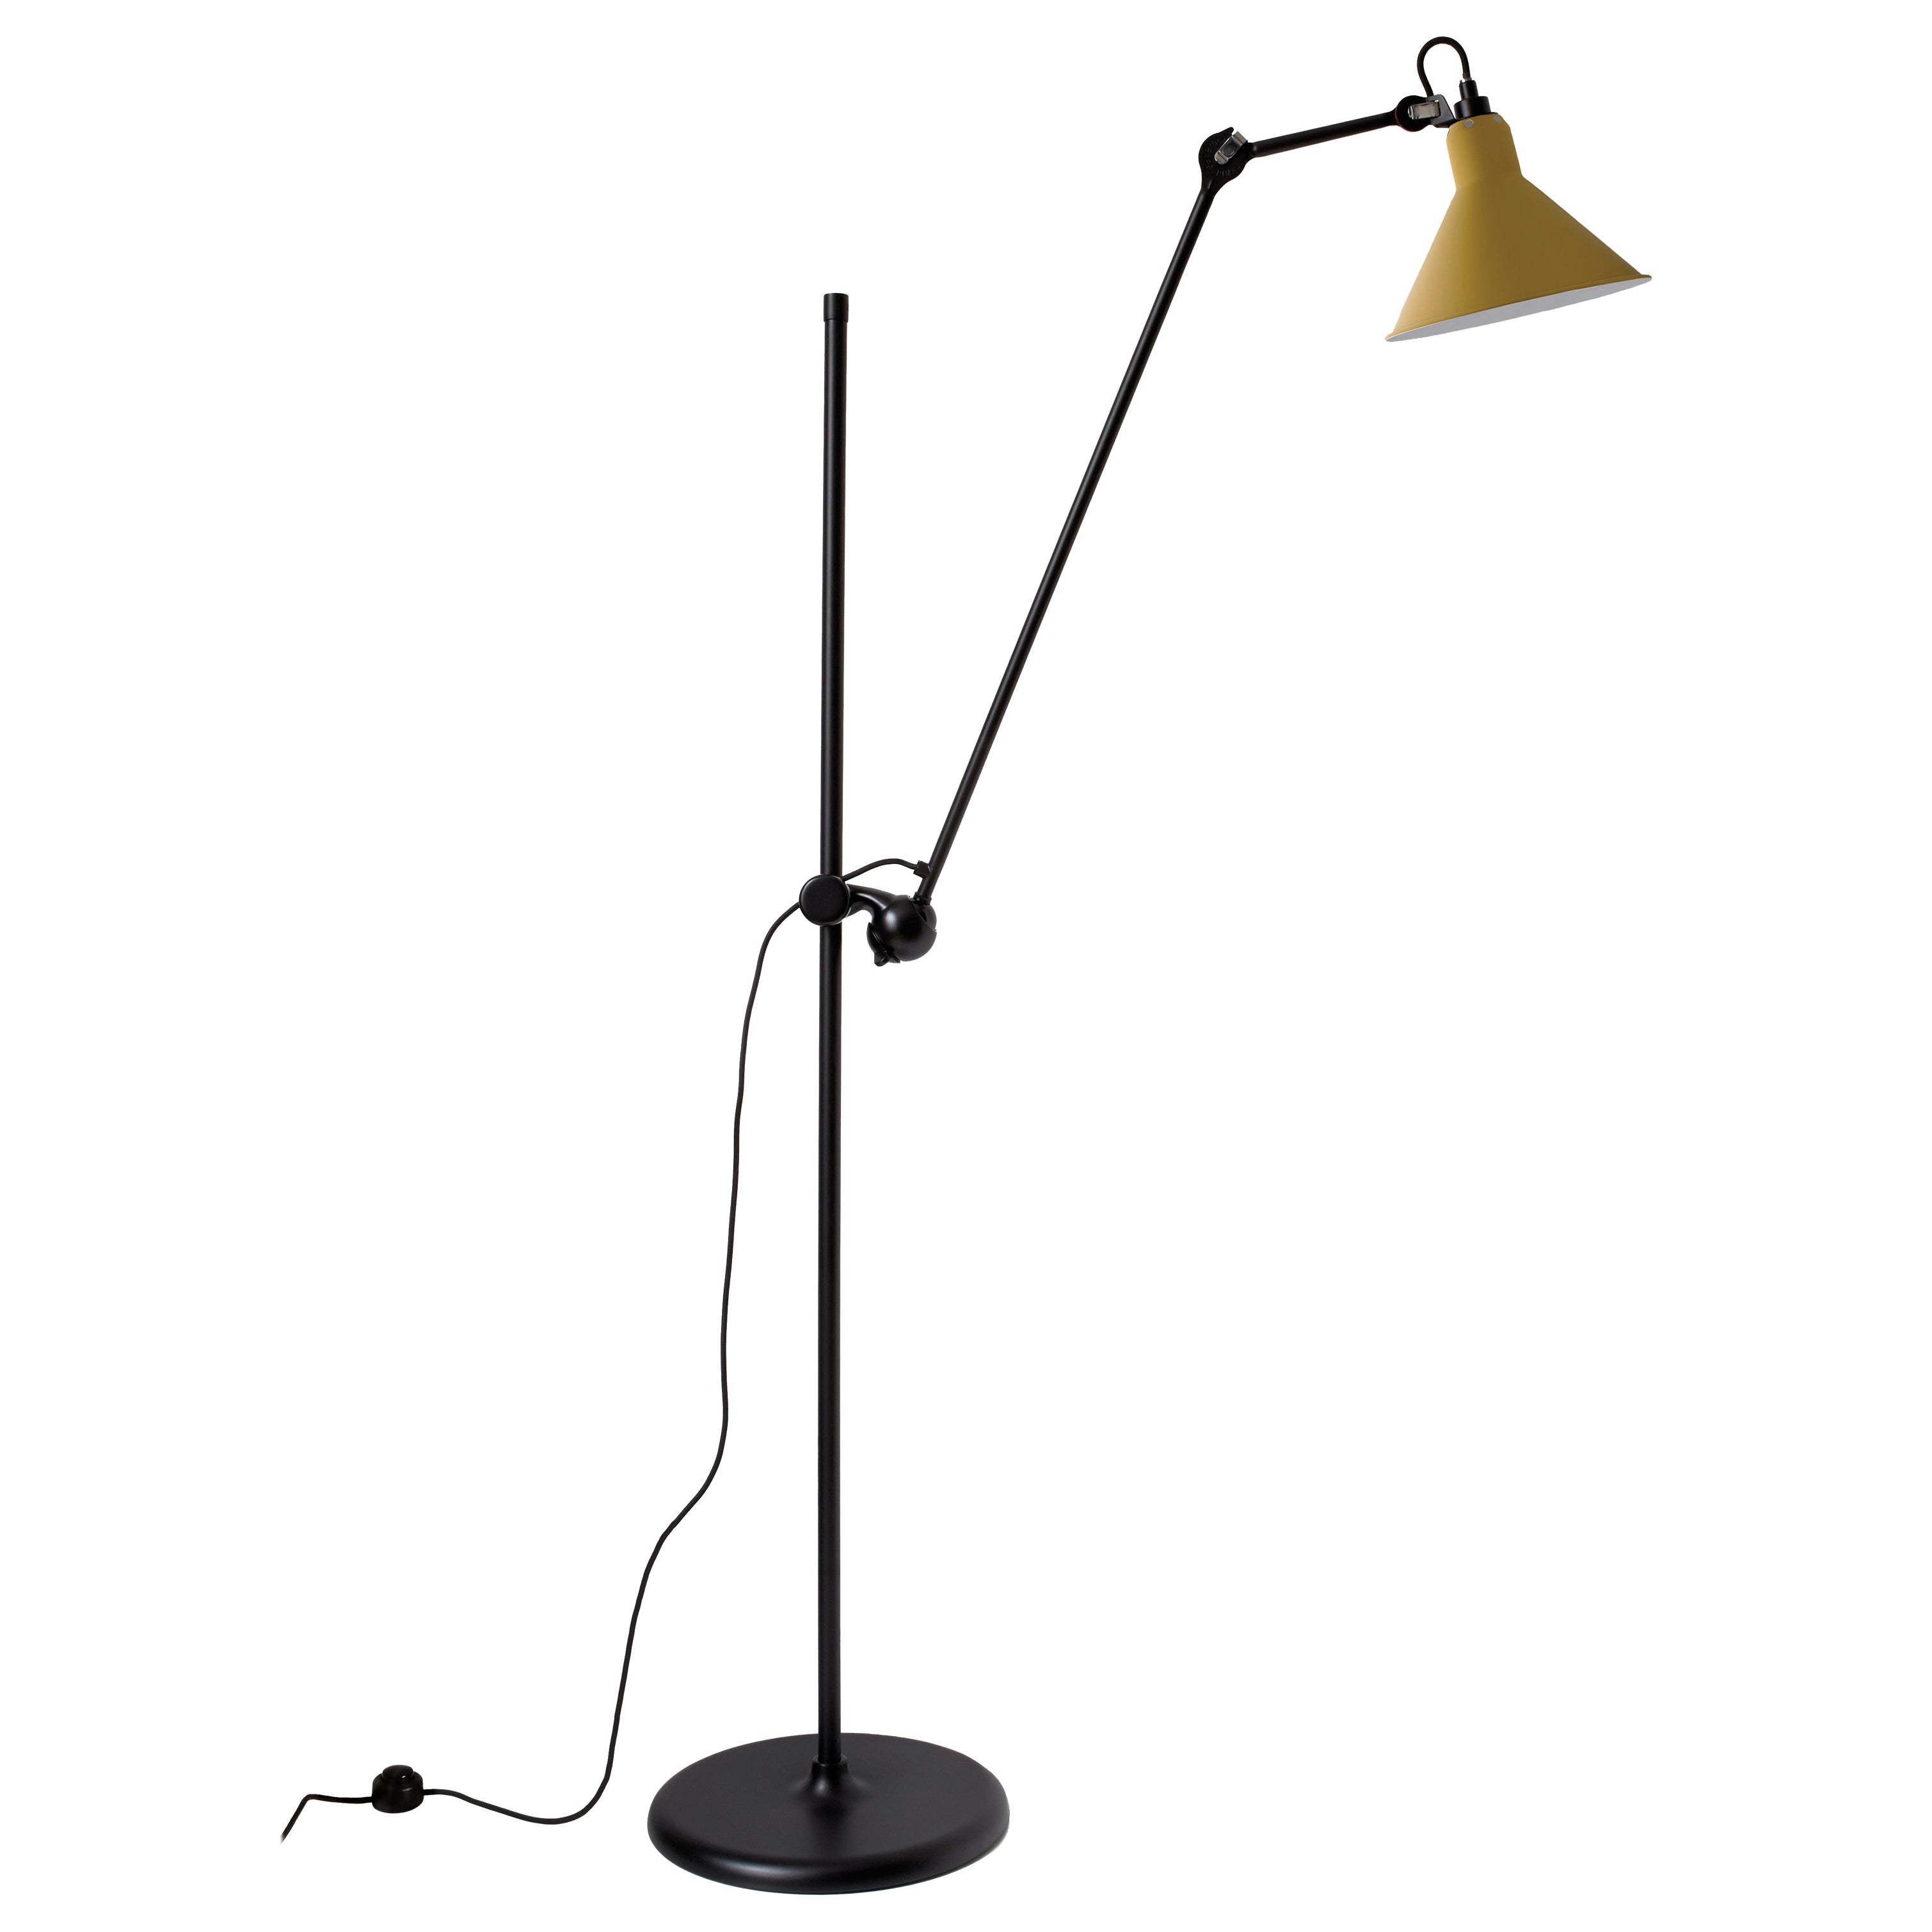 DCW Editions La Lampe Gras N°215 Floor Lamp in Black Arm and Yellow Shade